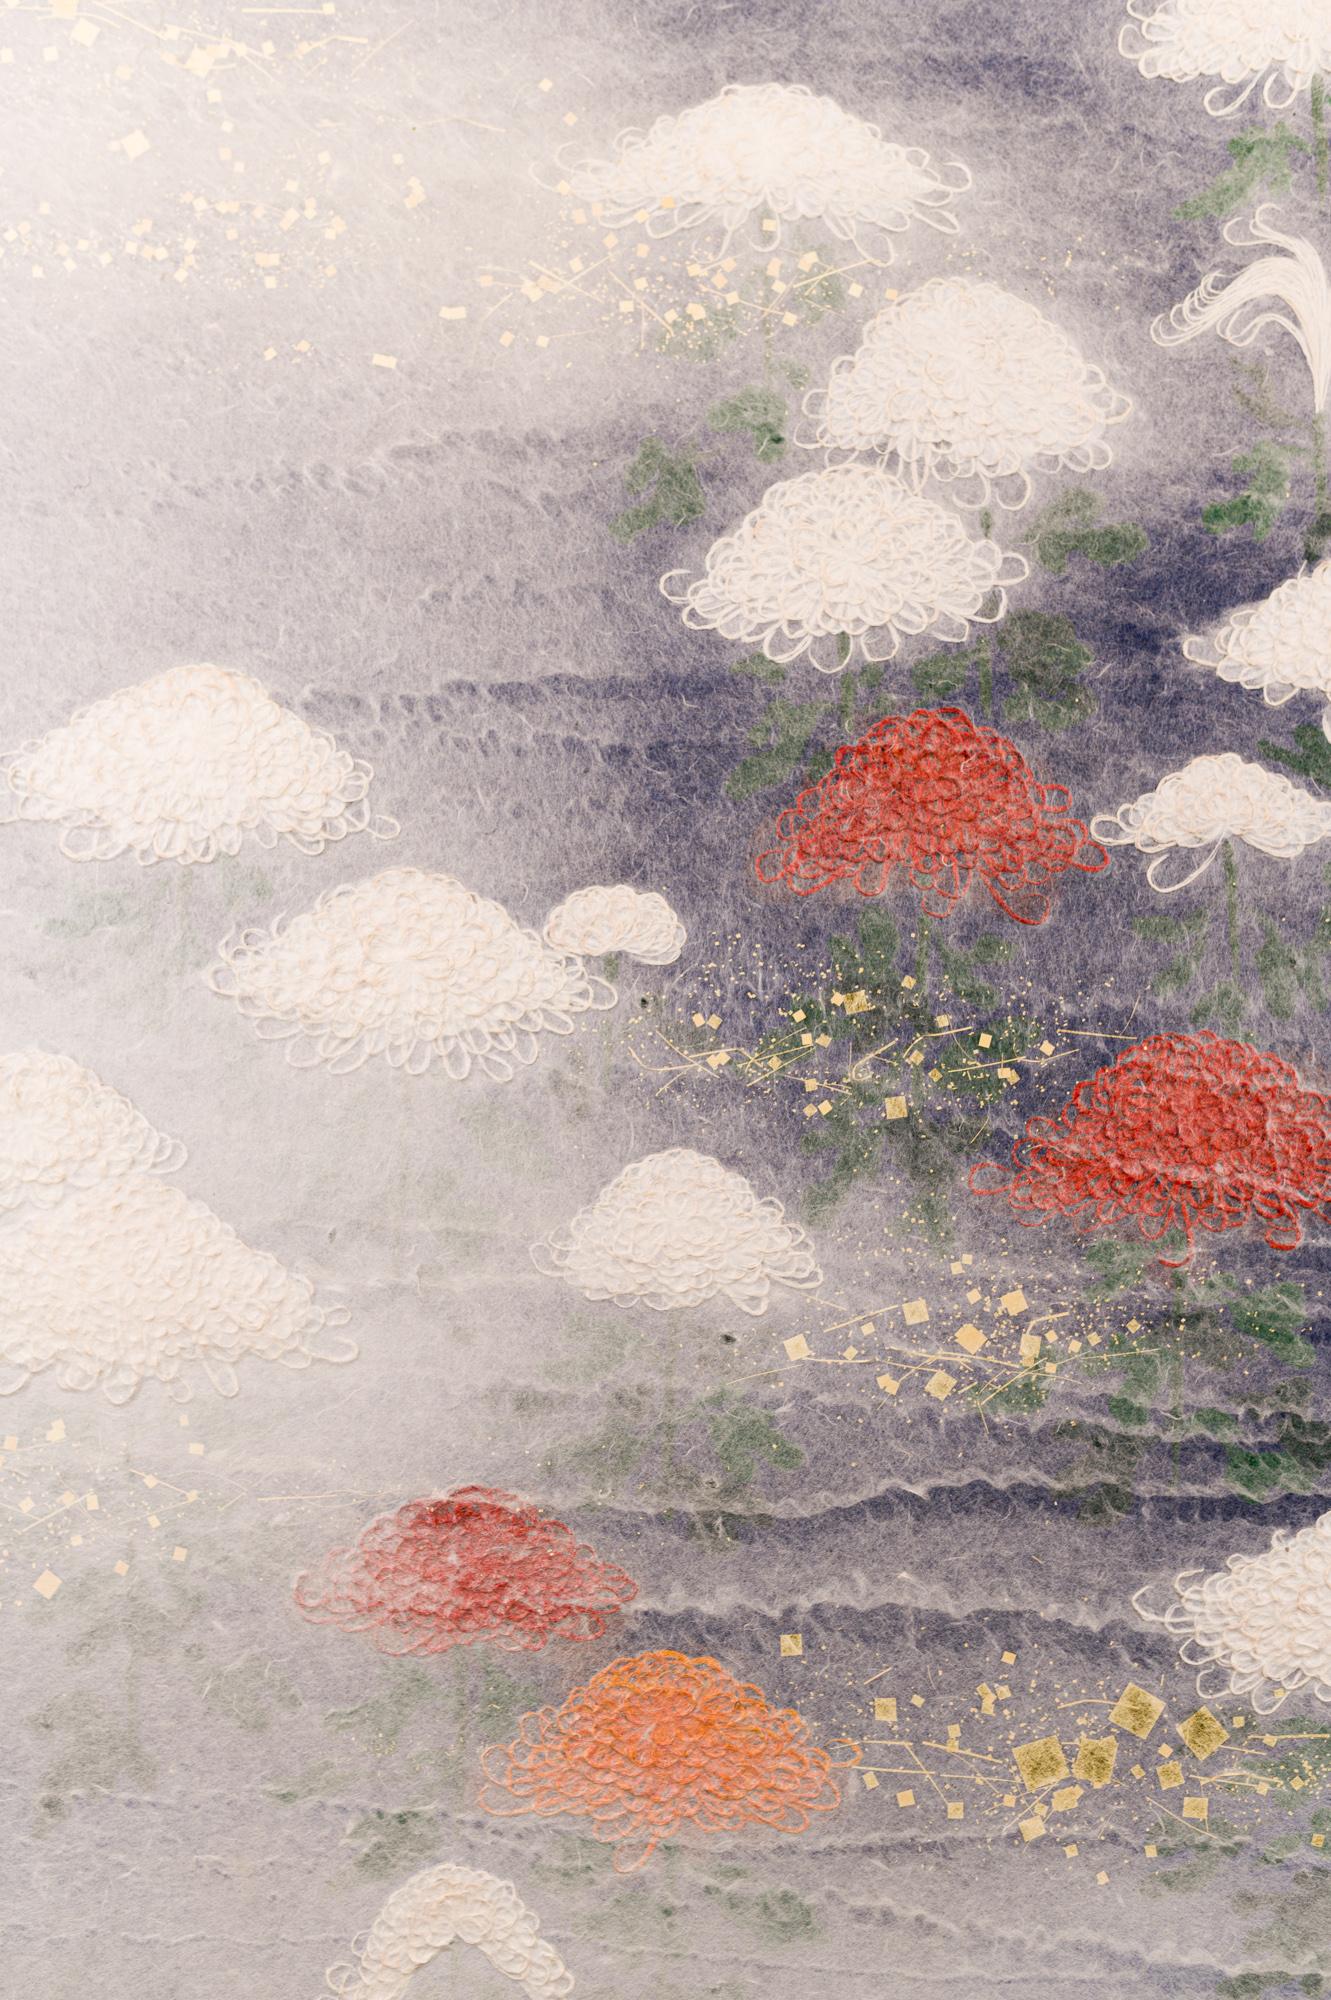 Japanese two panel screen: Chrysanthemums Through the Mist Obara Paper Art Screen. Surreal and masterful rendering of chrysanthemums cloaked in mist that varies in opacity made entirely of carefully arranged mulberry paper fibers in a Japanese art